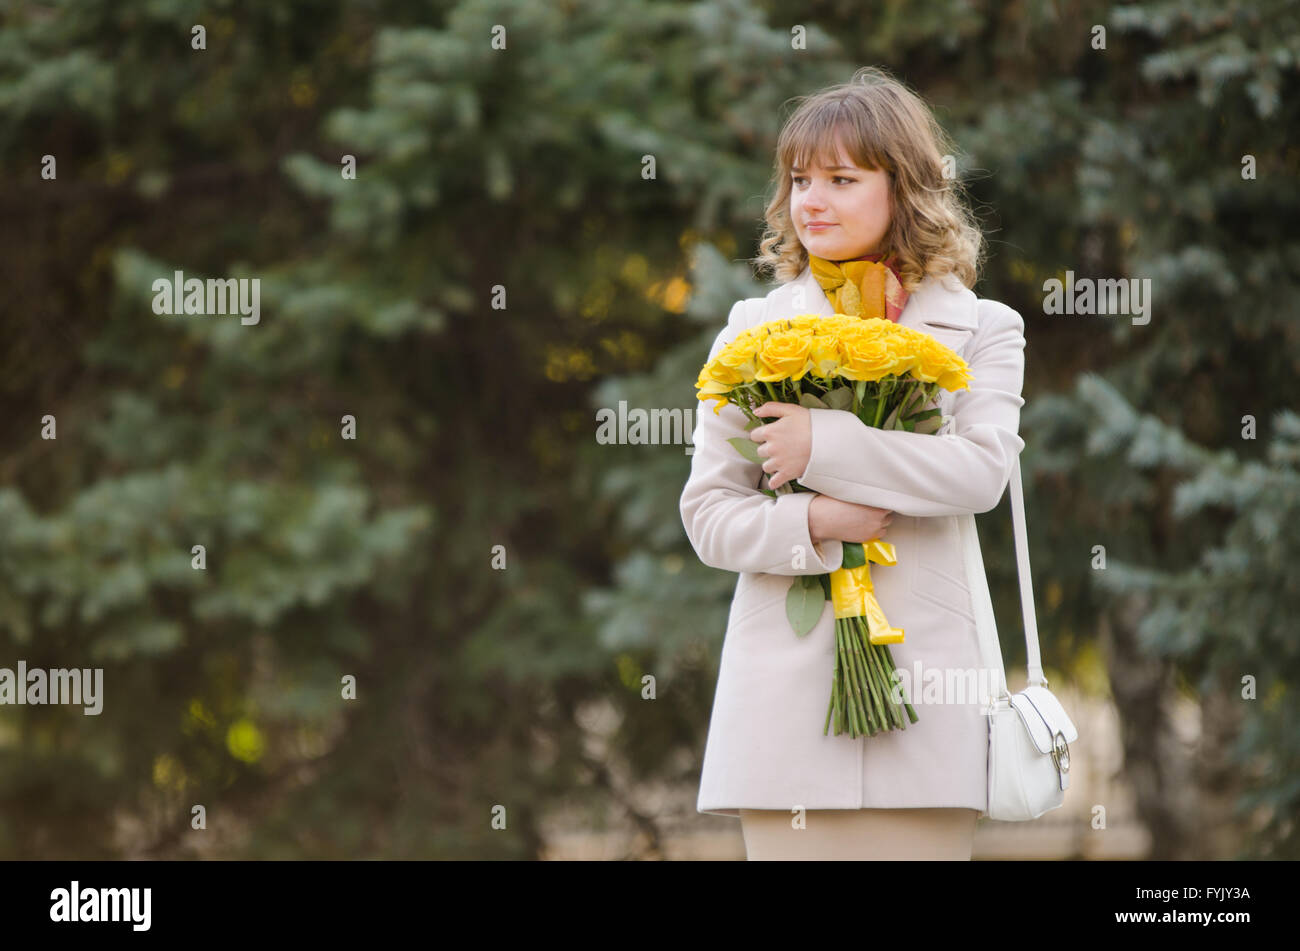 Cute little girl with yellow roses awaiting appointment Stock Photo